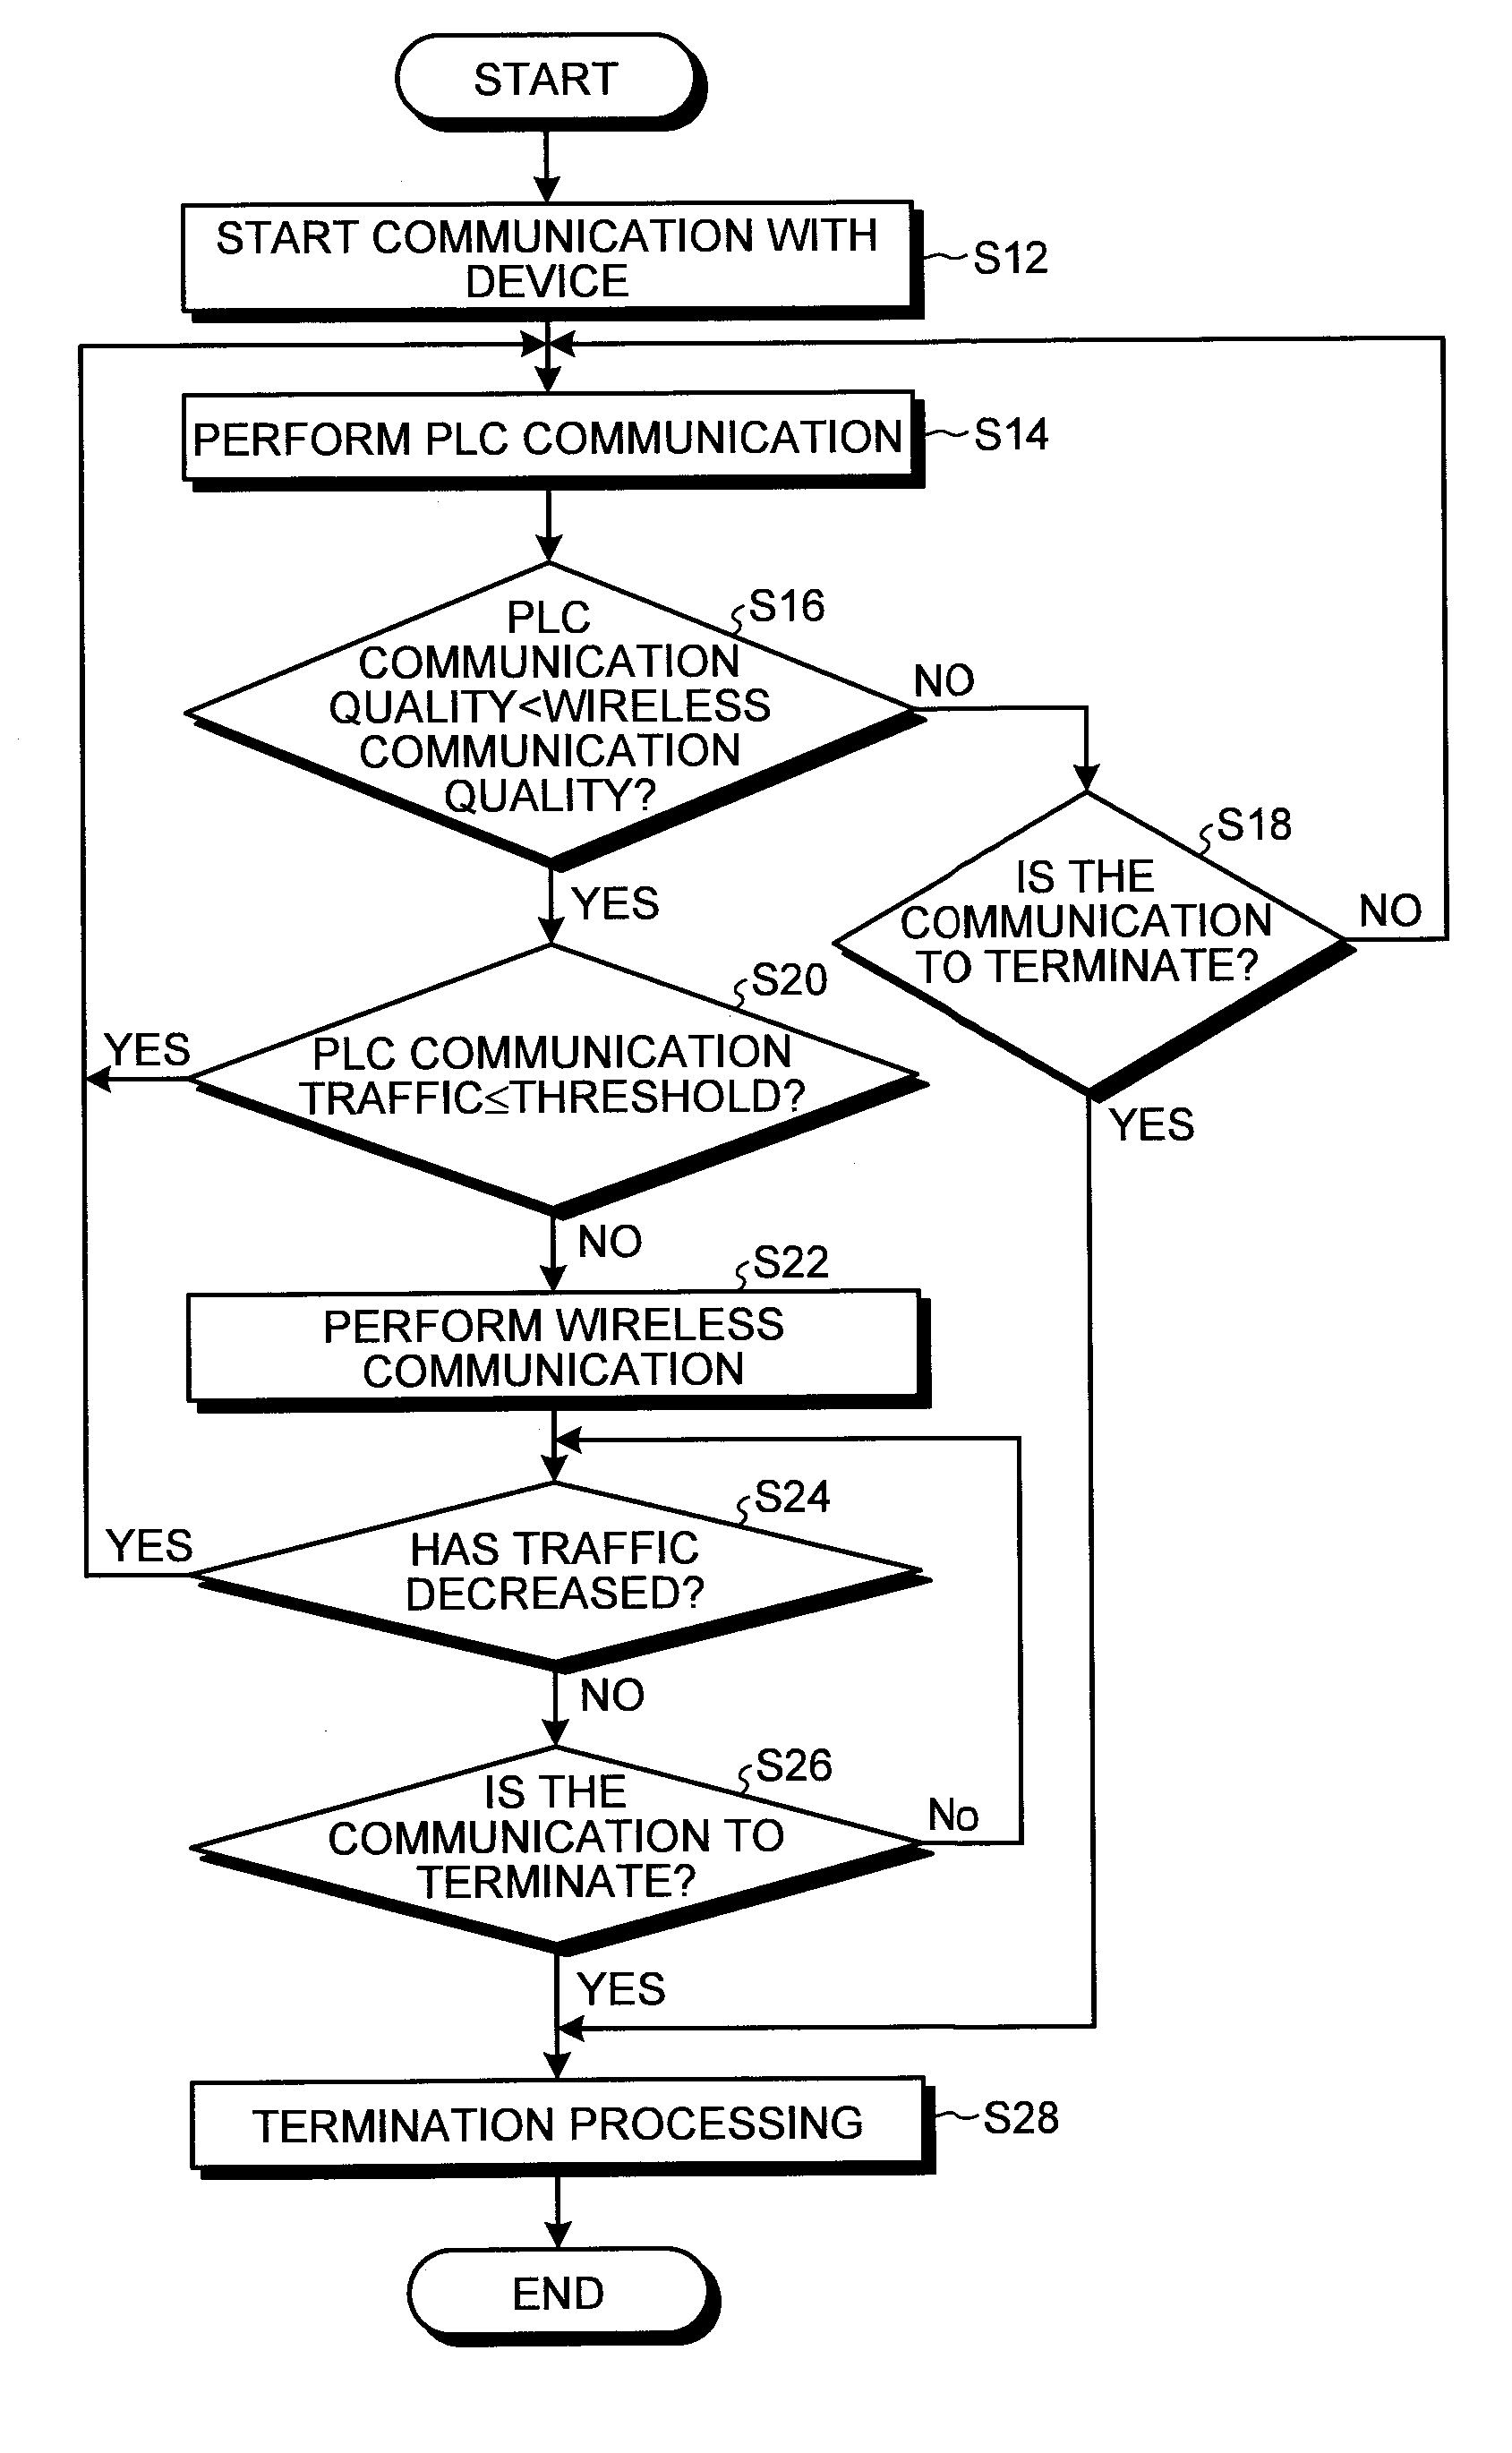 Communication repeater and communication system